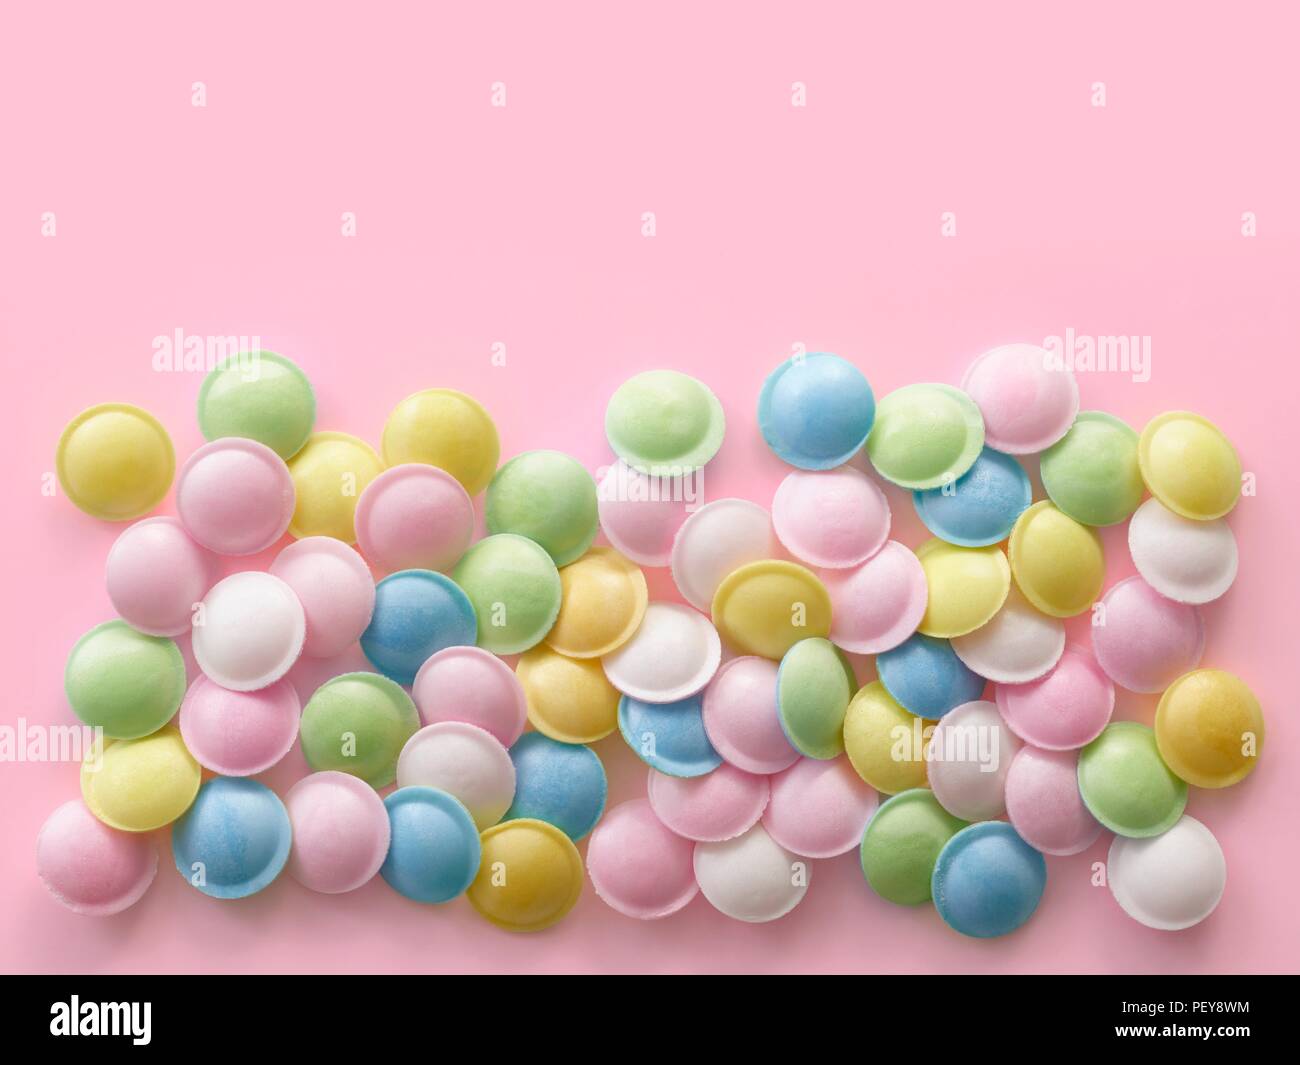 Pastel coloured sweets against a pink background. Stock Photo